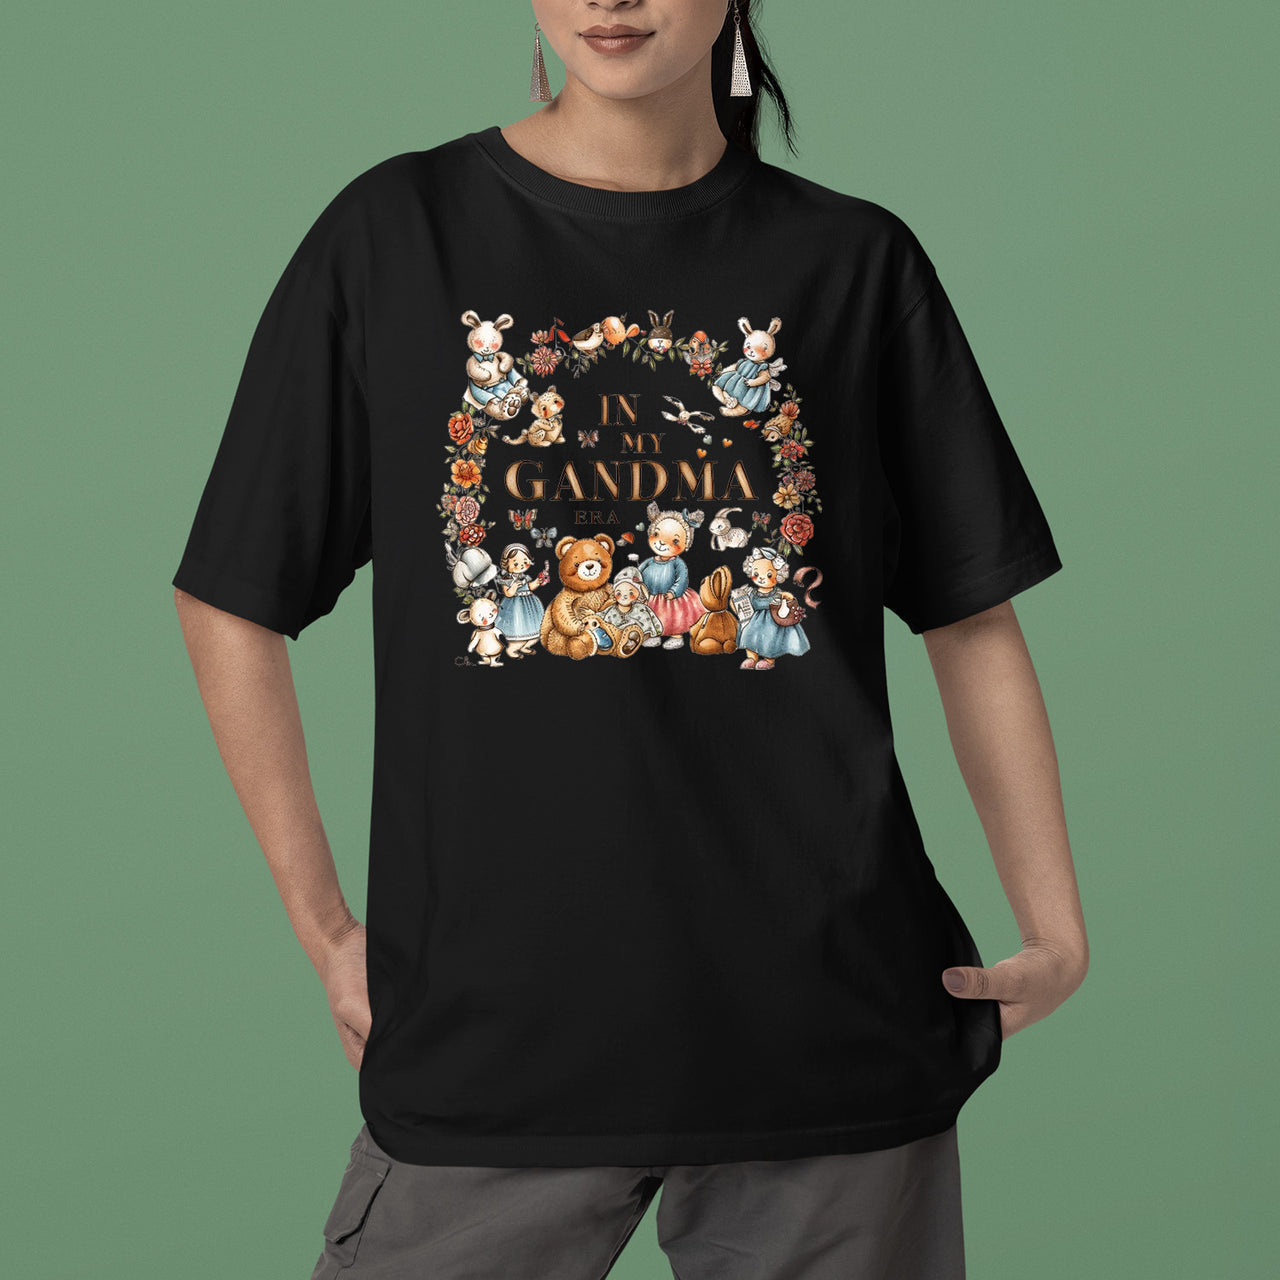 In My Grandma Era T-Shirt, Cute Toys Shirt, Celebrate Mom, Nana Shirt, Grandma Hoodie, Grandma Shirt, Mother's Day Gift For Grandma, Happy Mother's Day 01